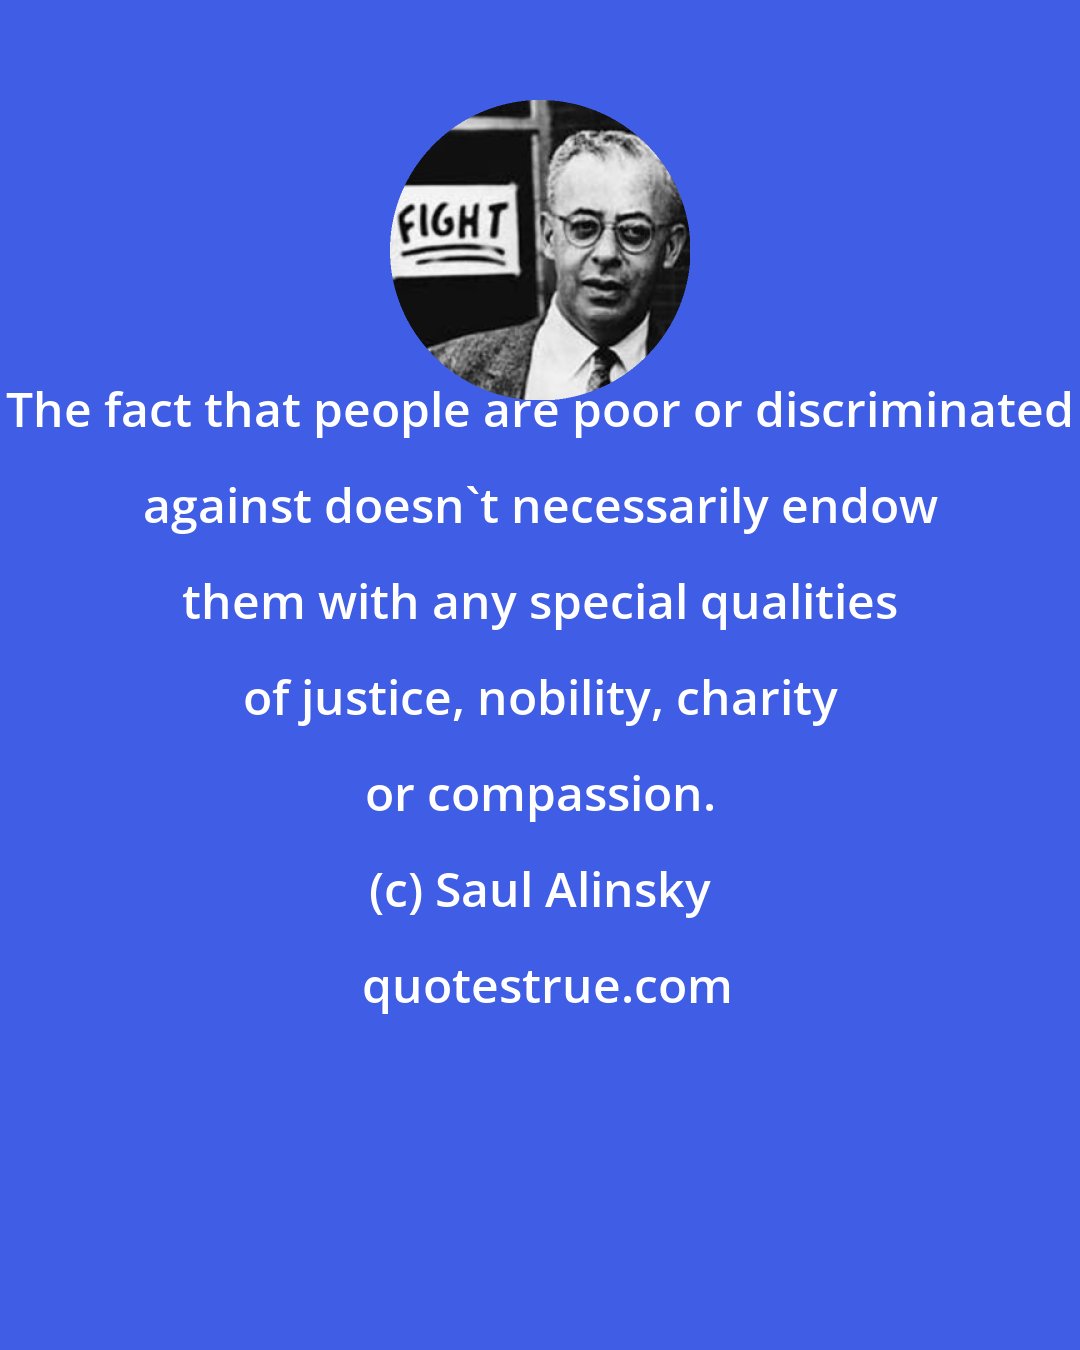 Saul Alinsky: The fact that people are poor or discriminated against doesn't necessarily endow them with any special qualities of justice, nobility, charity or compassion.